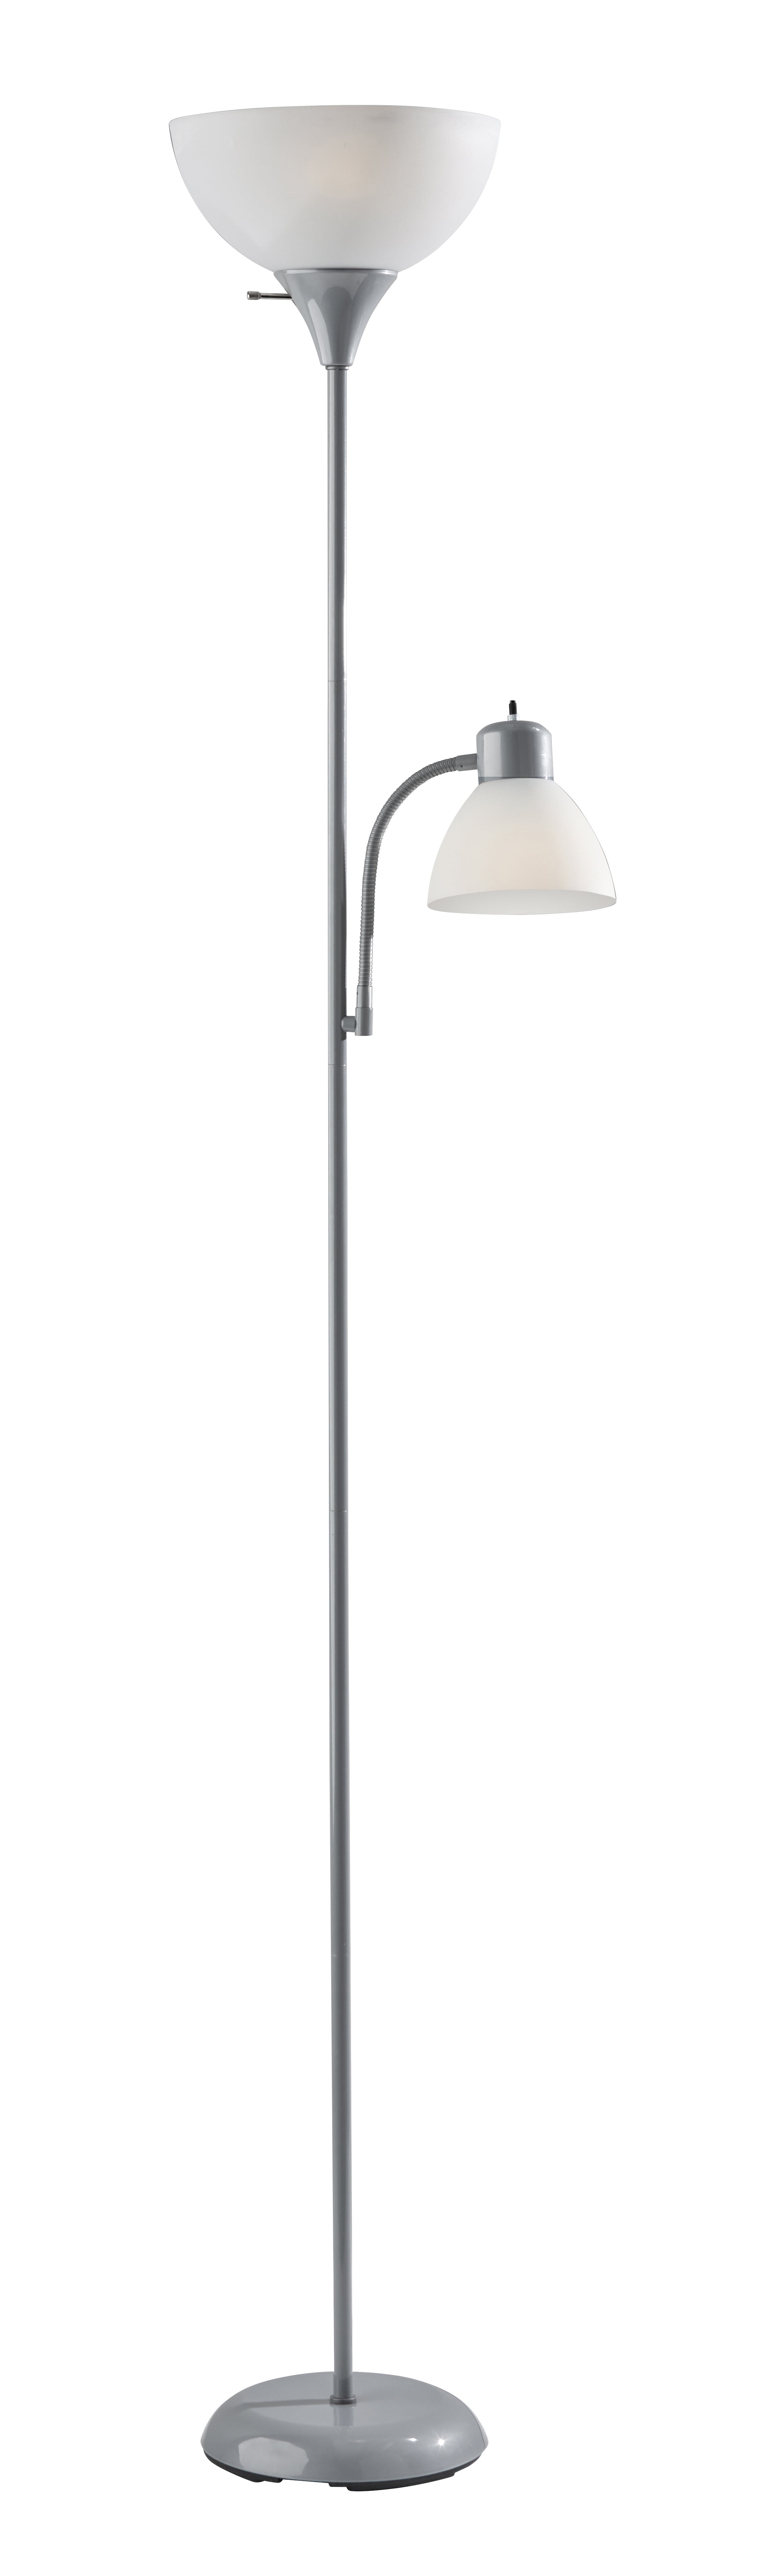 Standing Floor Lamp with Flexible Arm Light Adjustable Base Reading Home  Collectibles & Art US $116.26